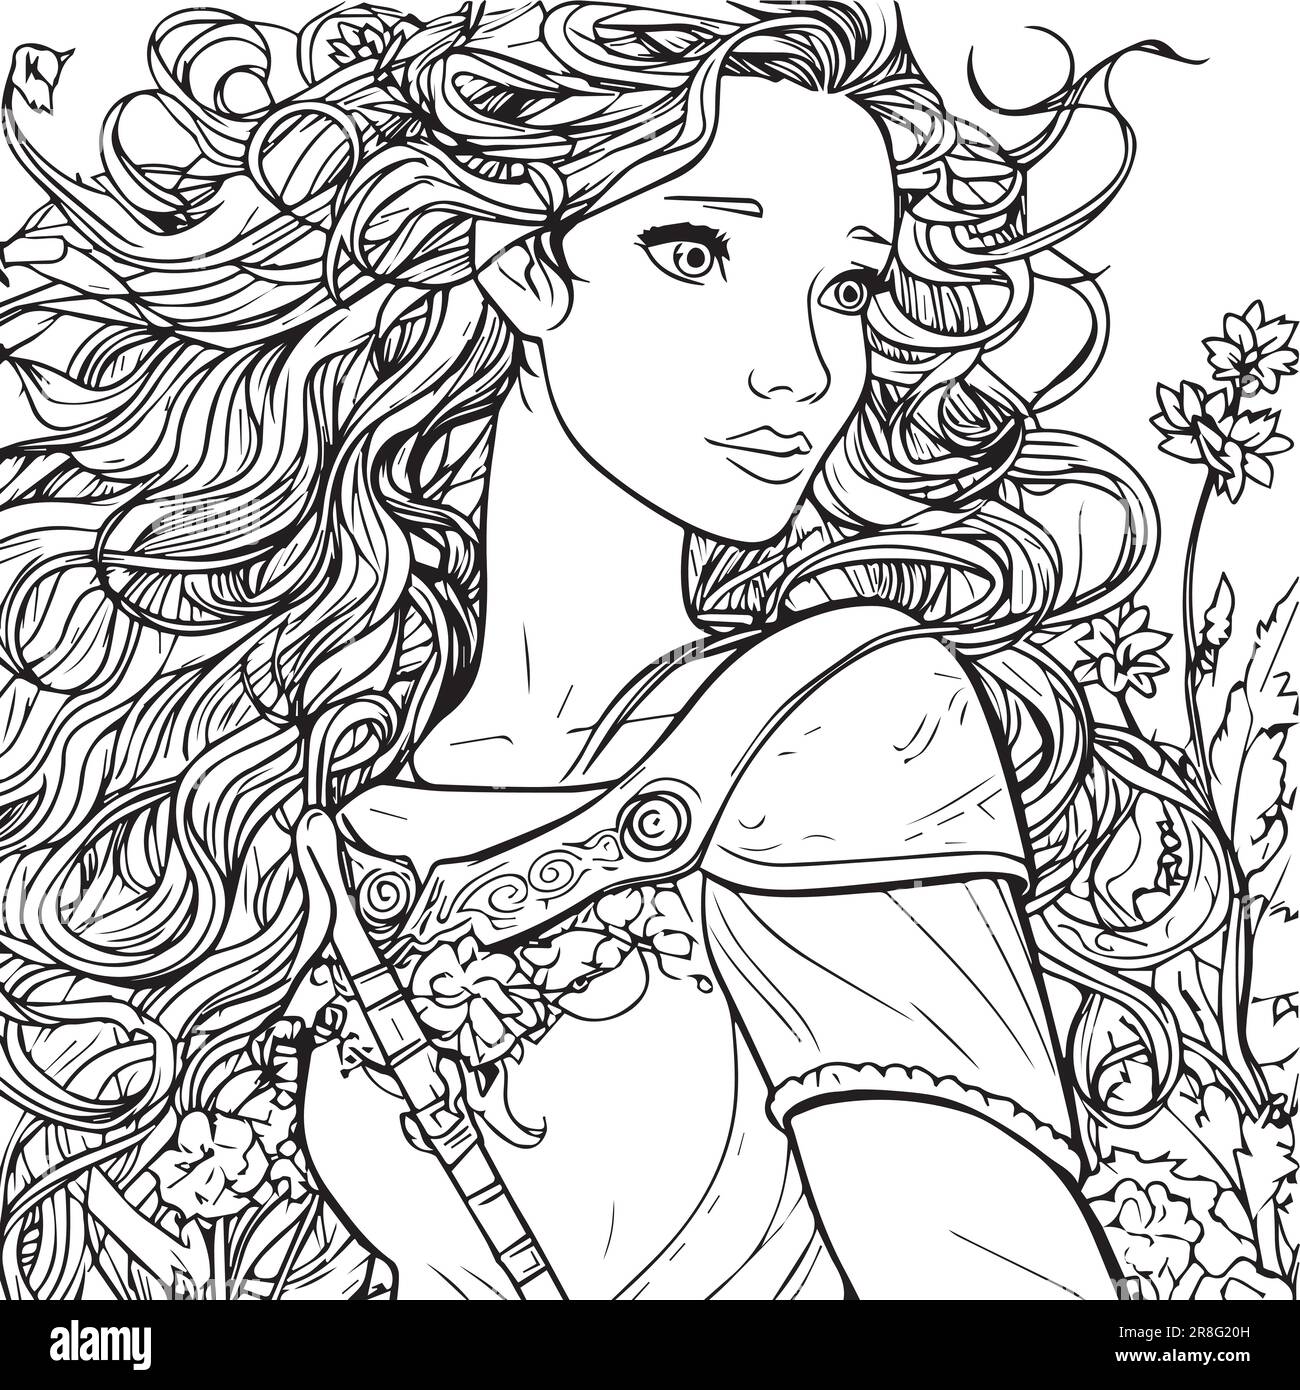 Creative Girl line art coloring page design Stock Vector